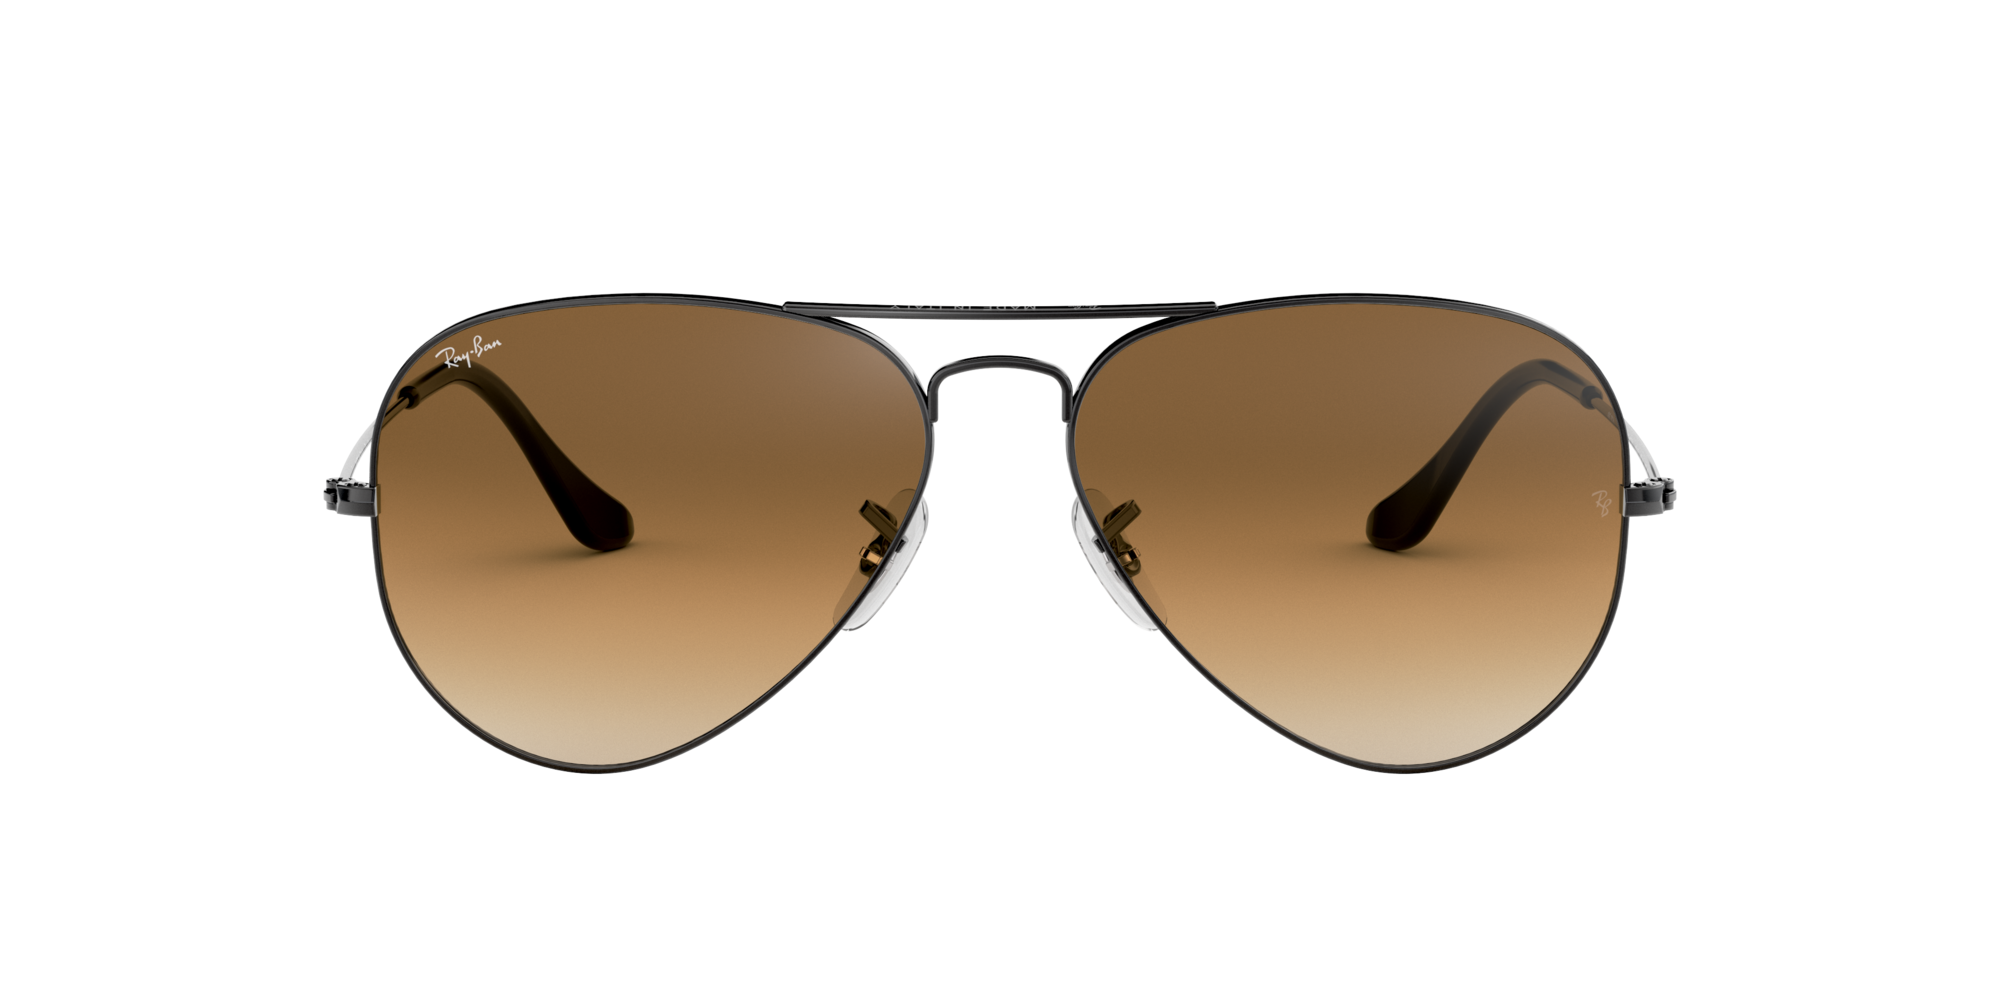 ray ban 3025 brown gradient